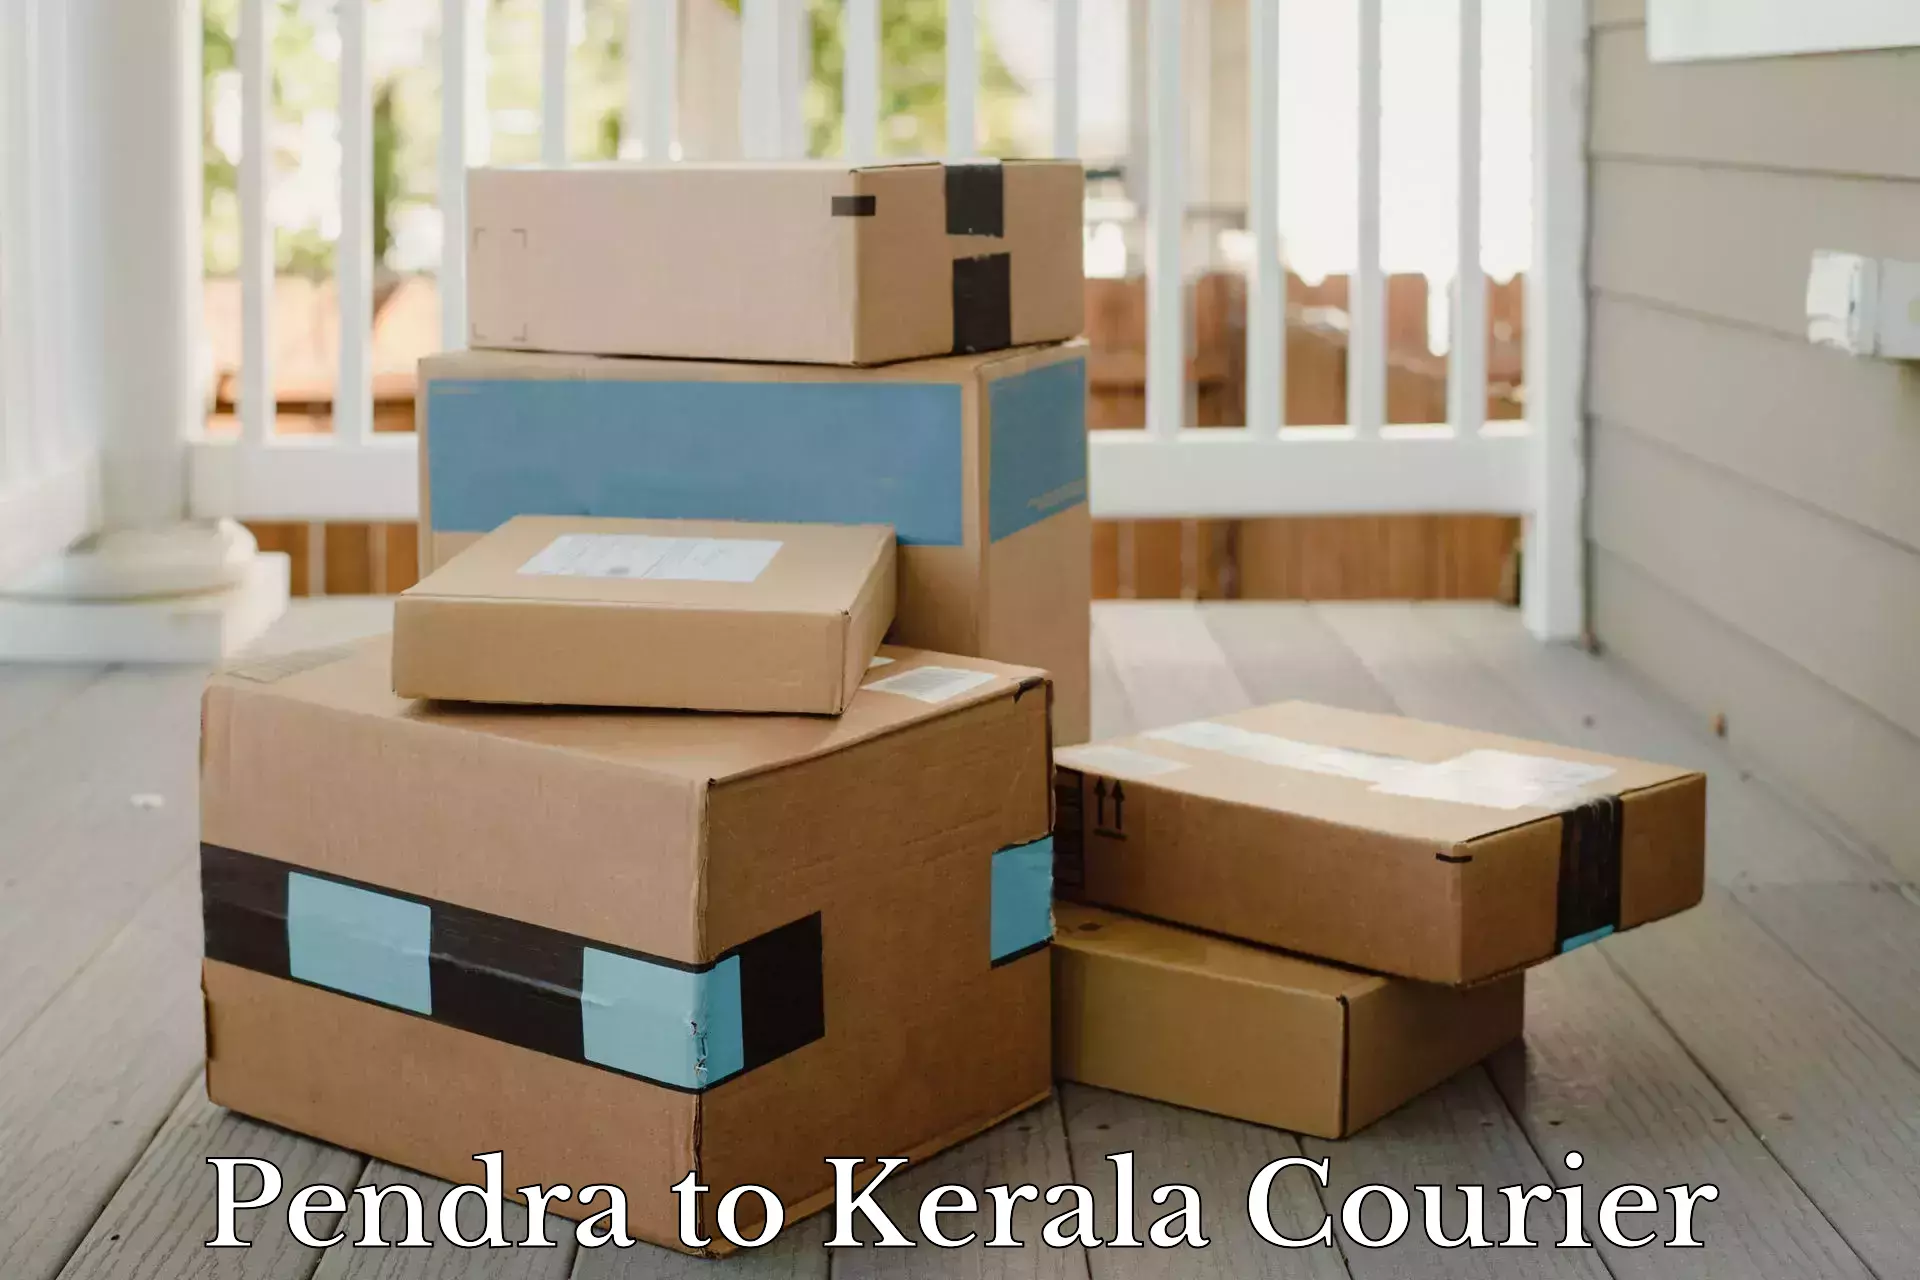 Nationwide courier service Pendra to Kerala